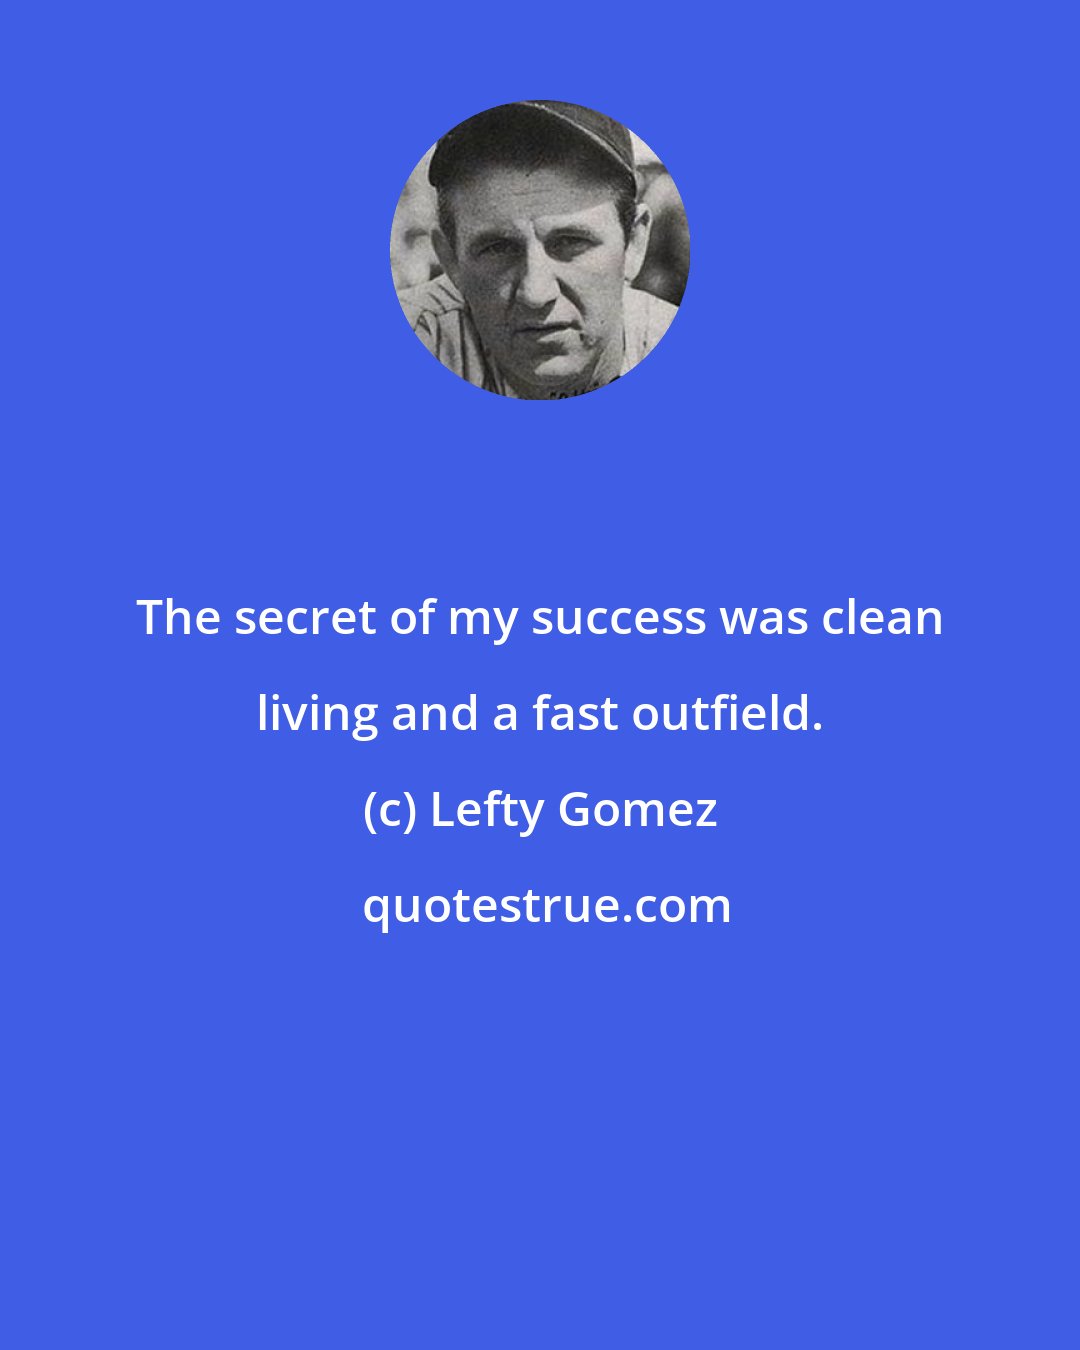 Lefty Gomez: The secret of my success was clean living and a fast outfield.